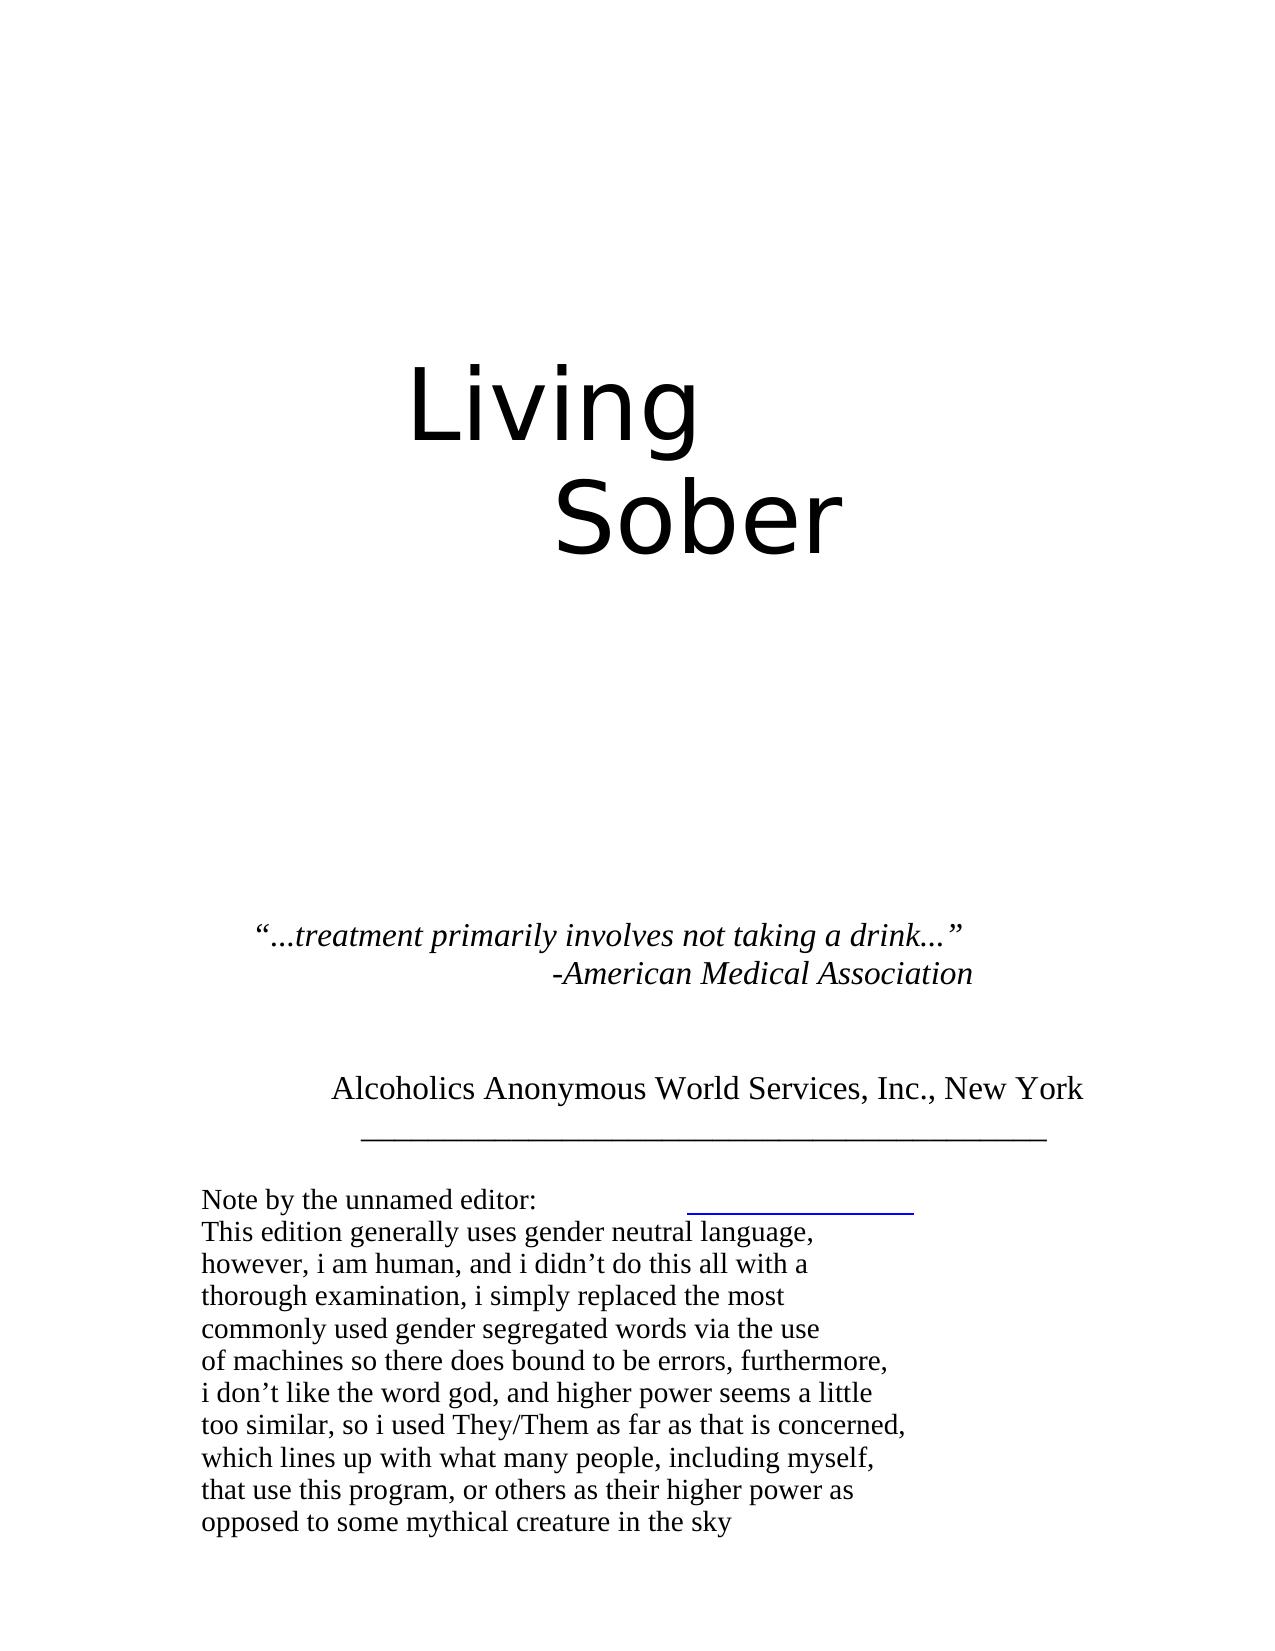 Living Sober - Alternative Edition by Anonymous